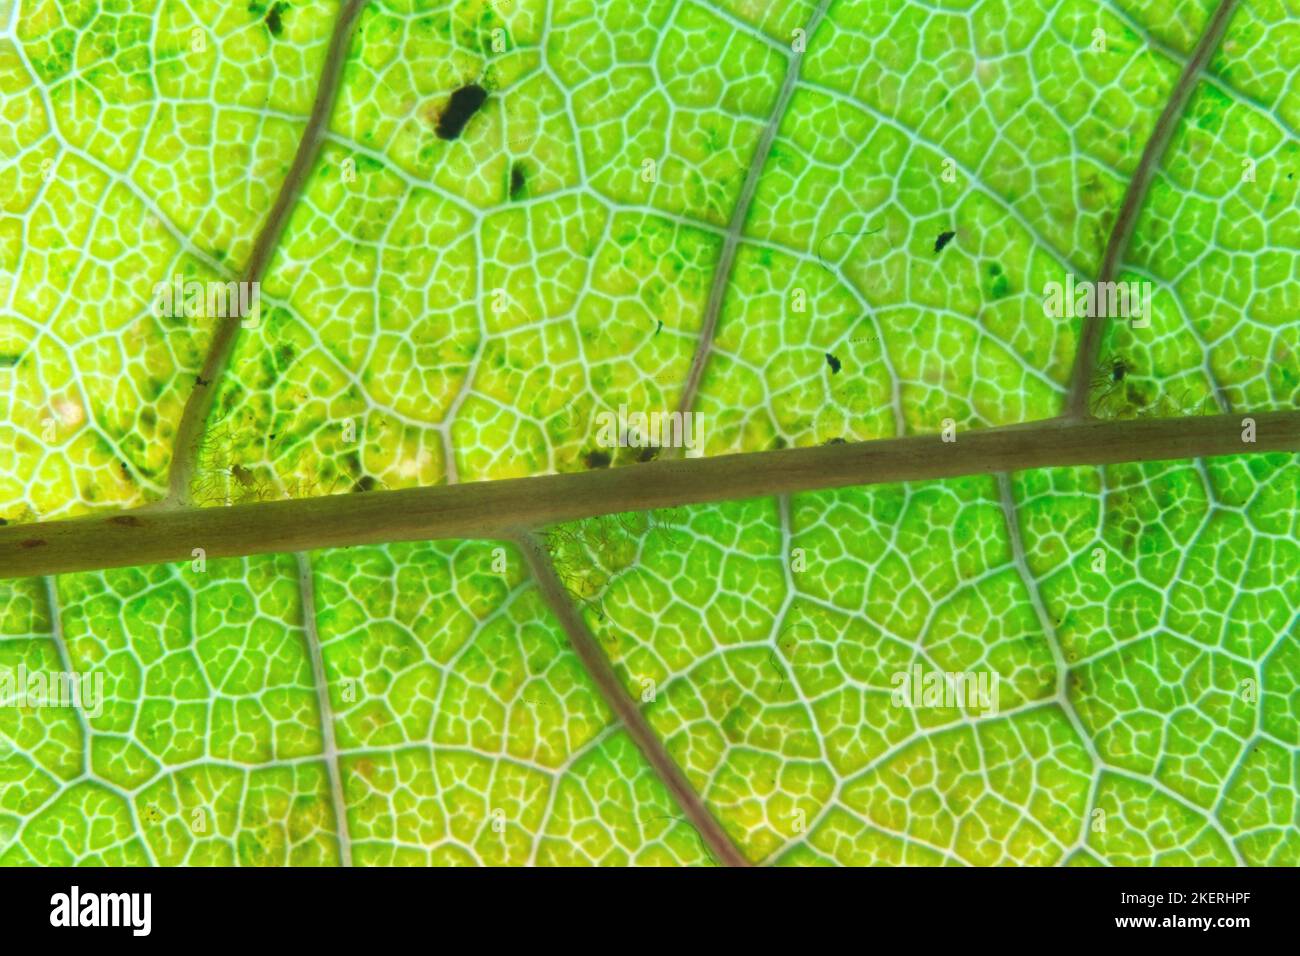 Leaf of a deciduous tree with leaf veins under a magnifying glass Stock Photo